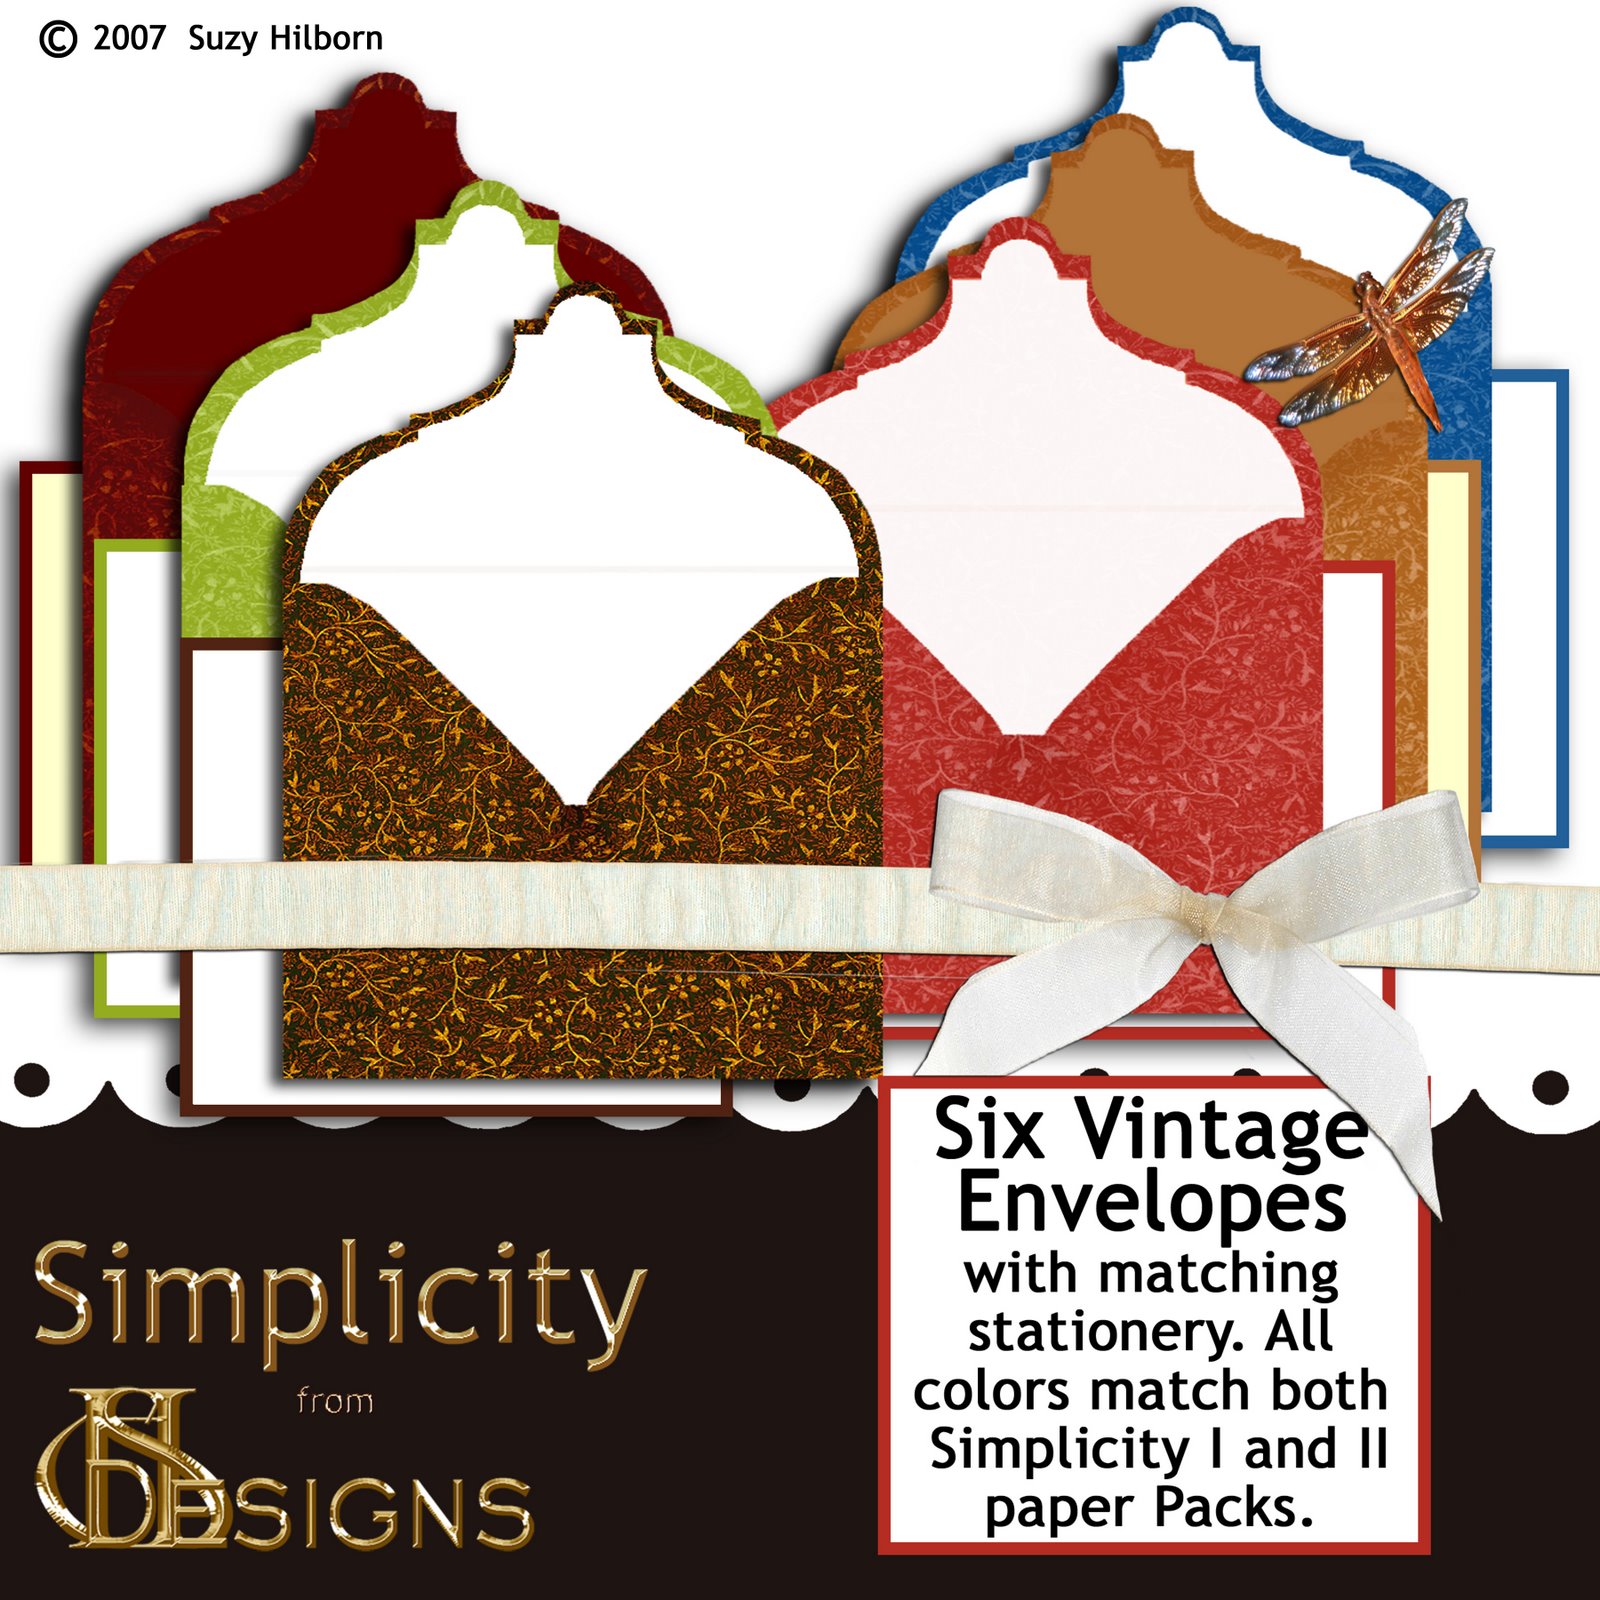 [SHI_Simplicity_Stationery_Envelope_Product_Page.jpg]